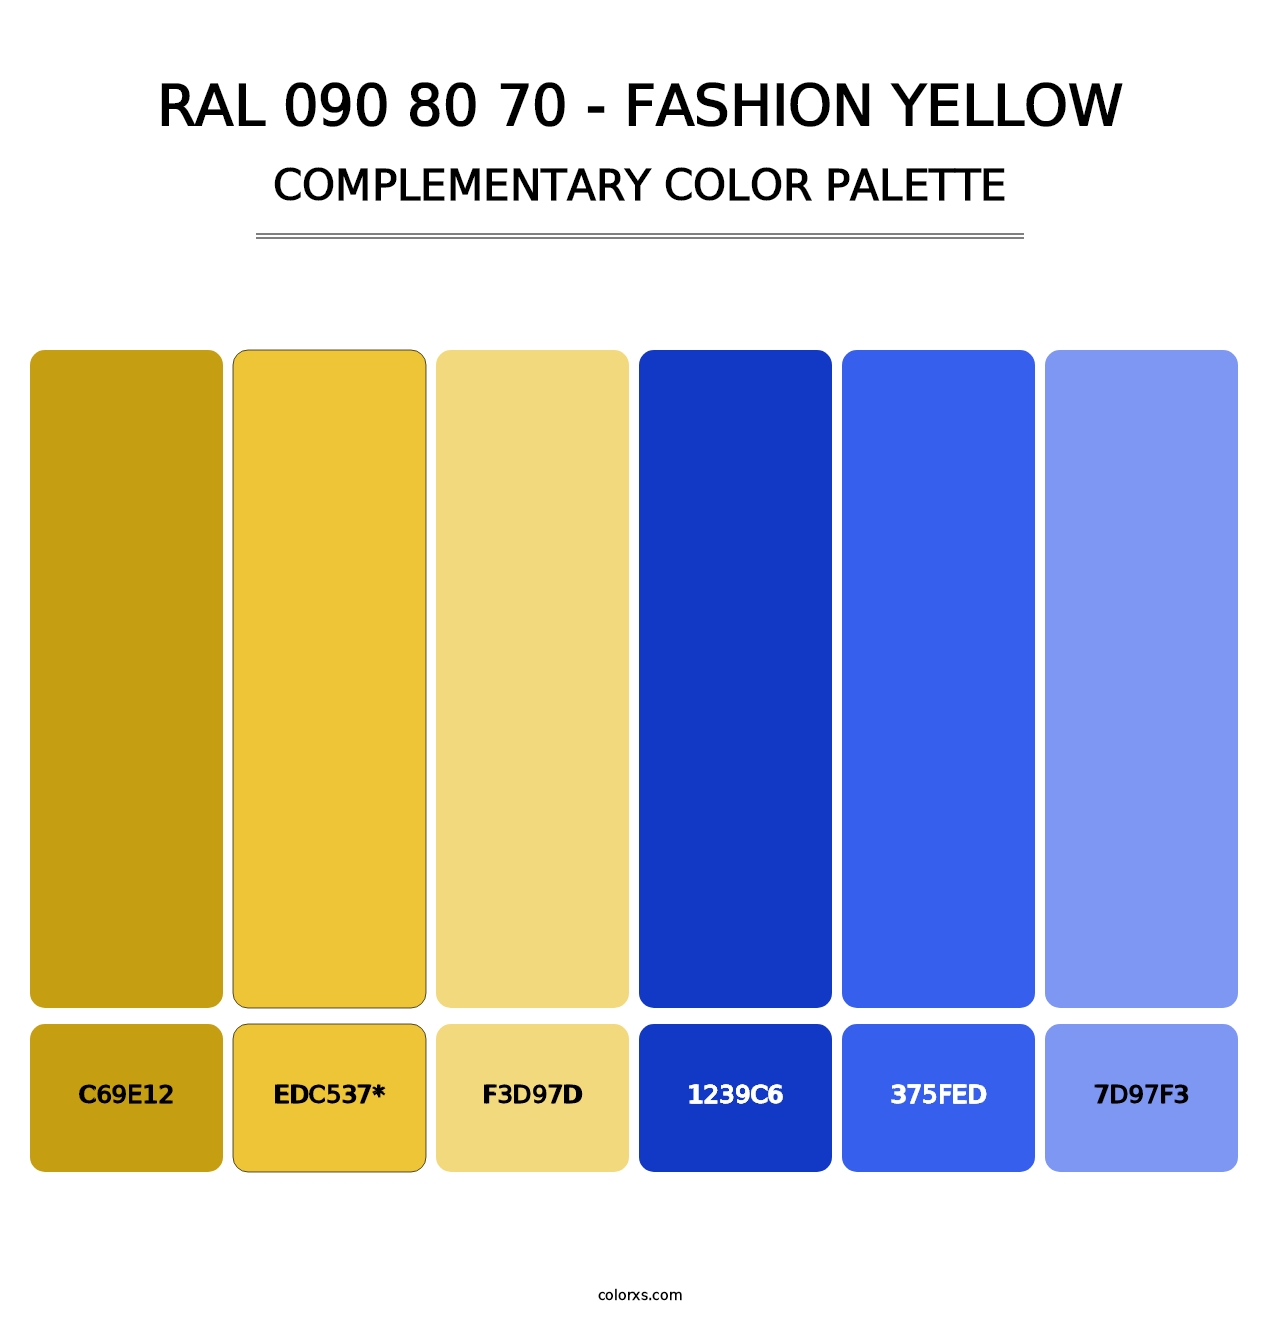 RAL 090 80 70 - Fashion Yellow - Complementary Color Palette